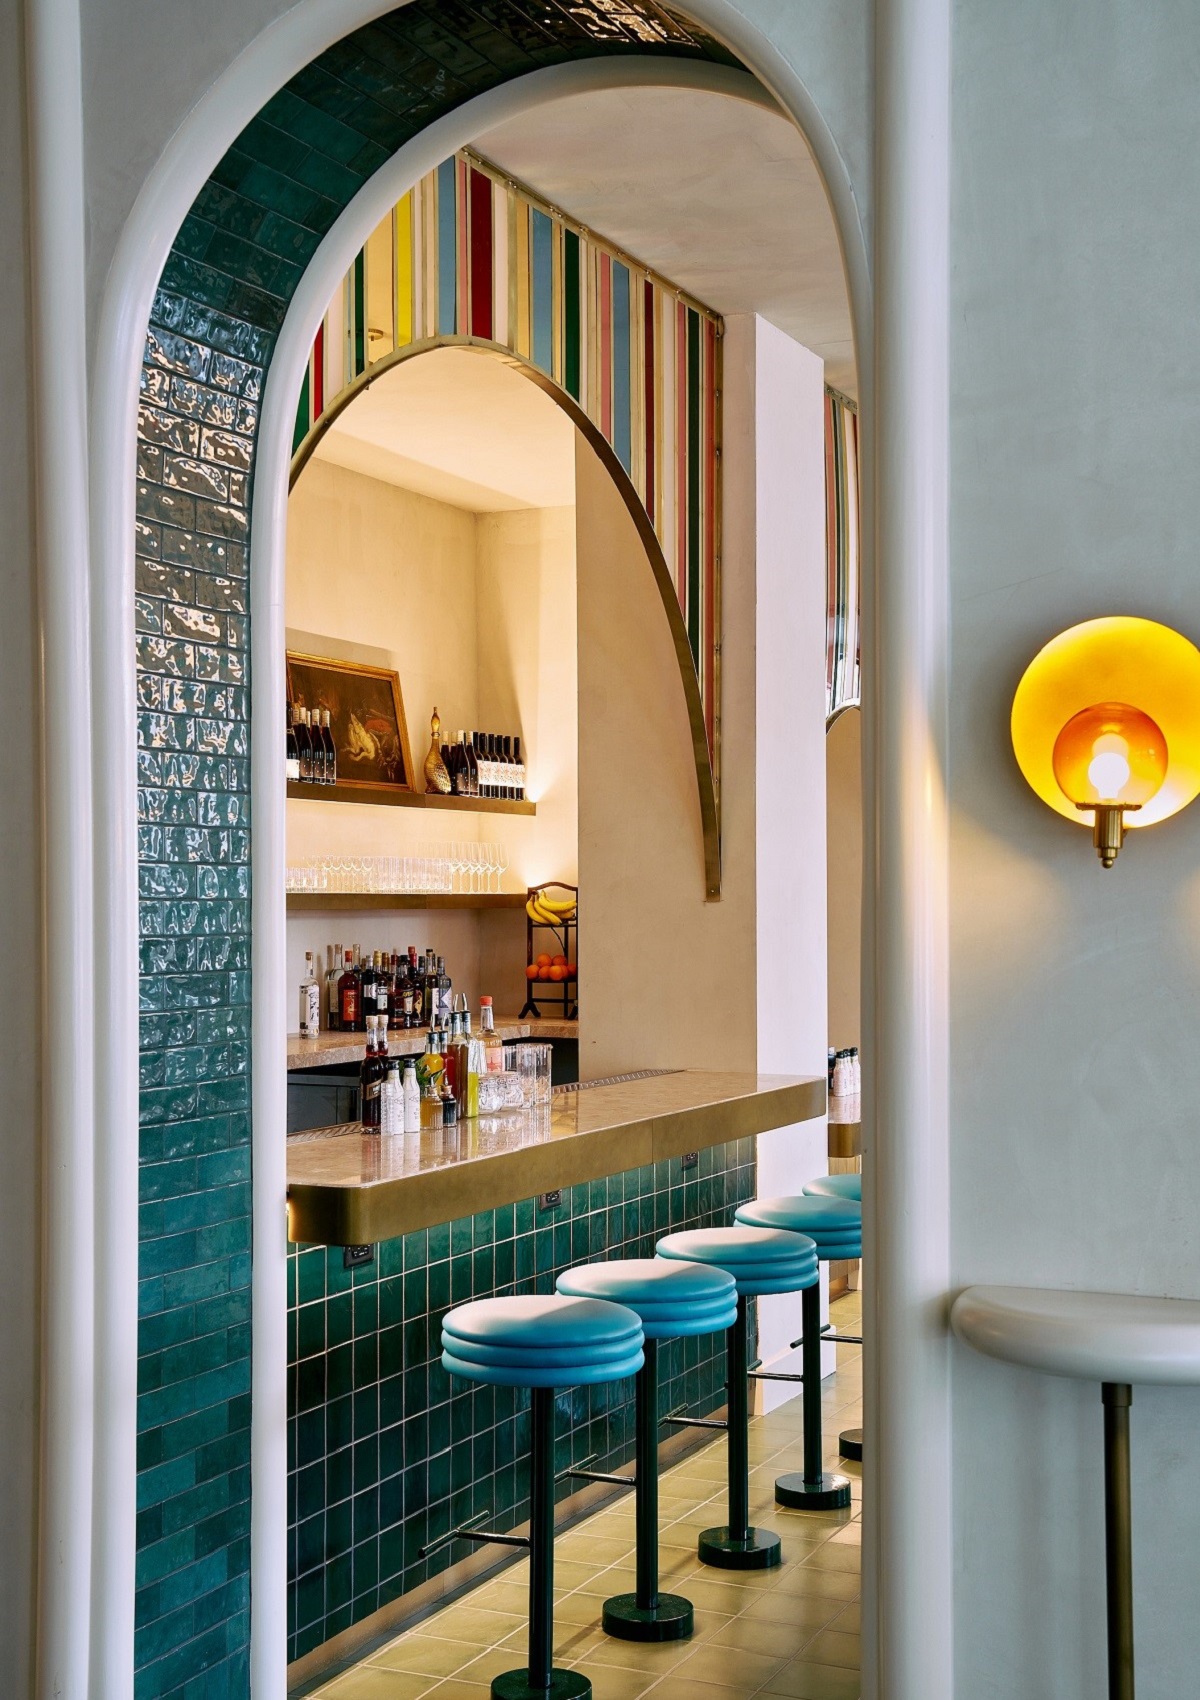 view through tiled archway to bar with seating and striped and tiled detail